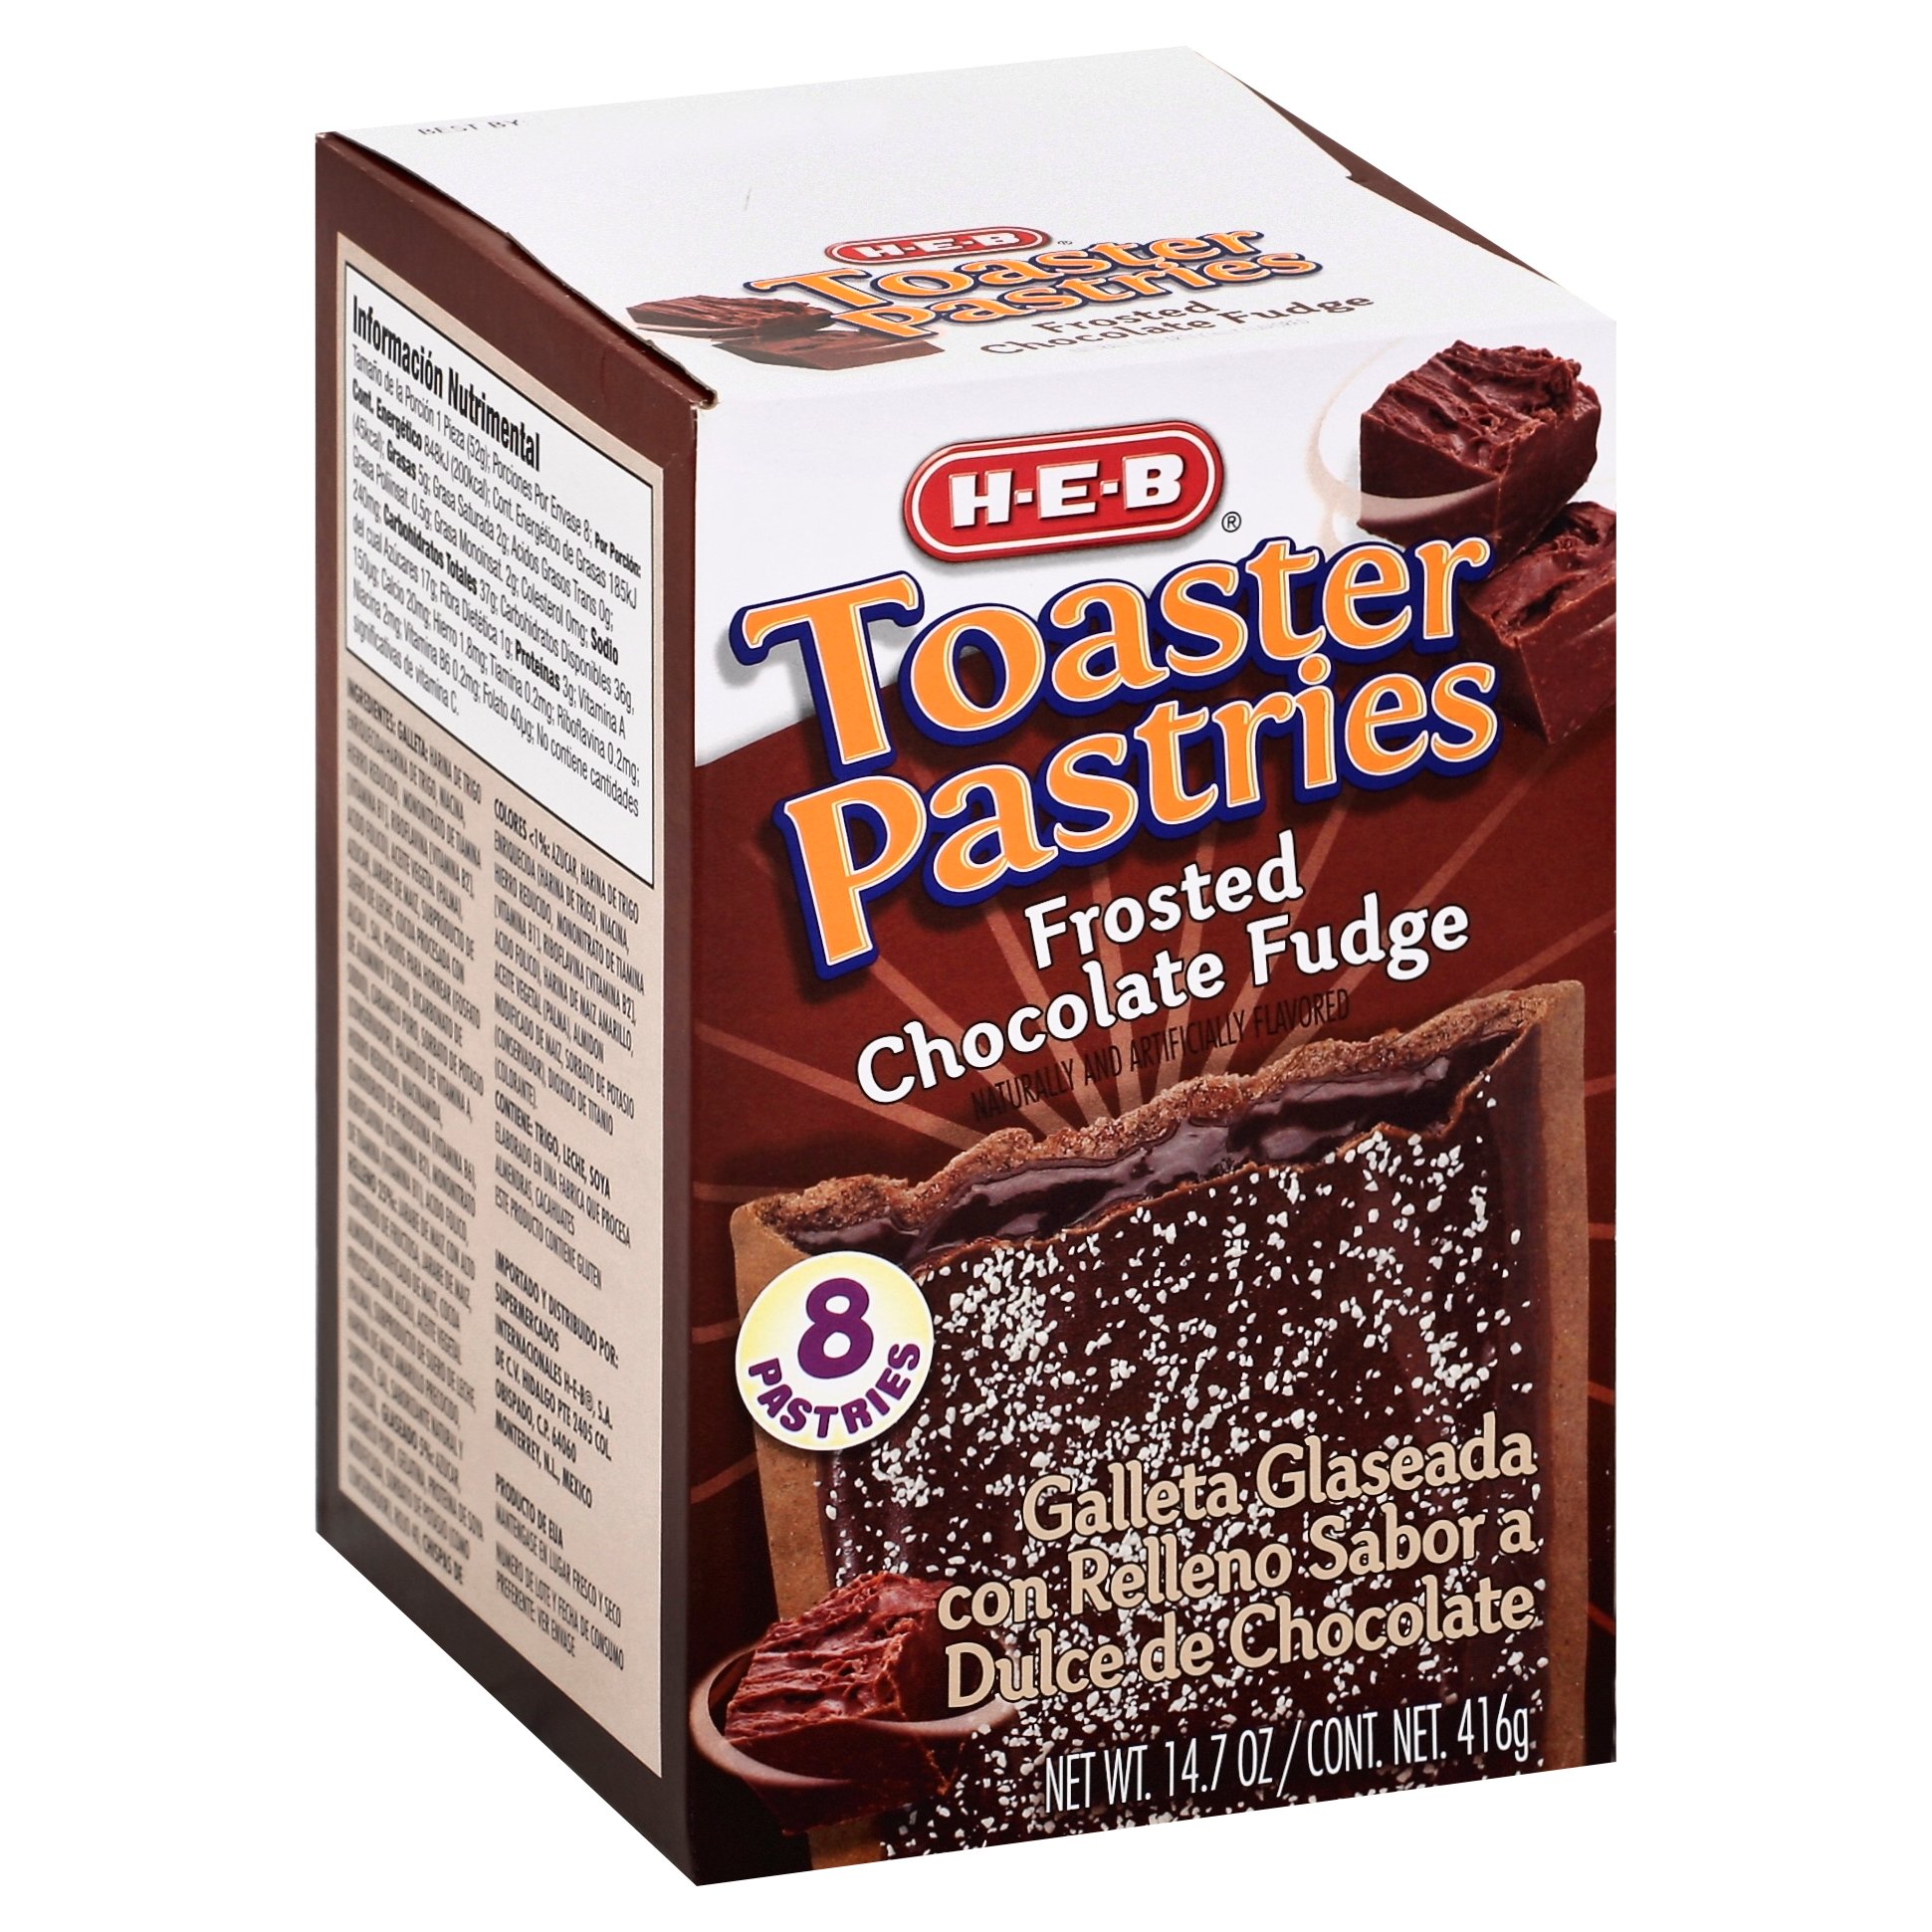 Pop-Tarts Frosted Strawberry Bites - Shop Toaster Pastries at H-E-B